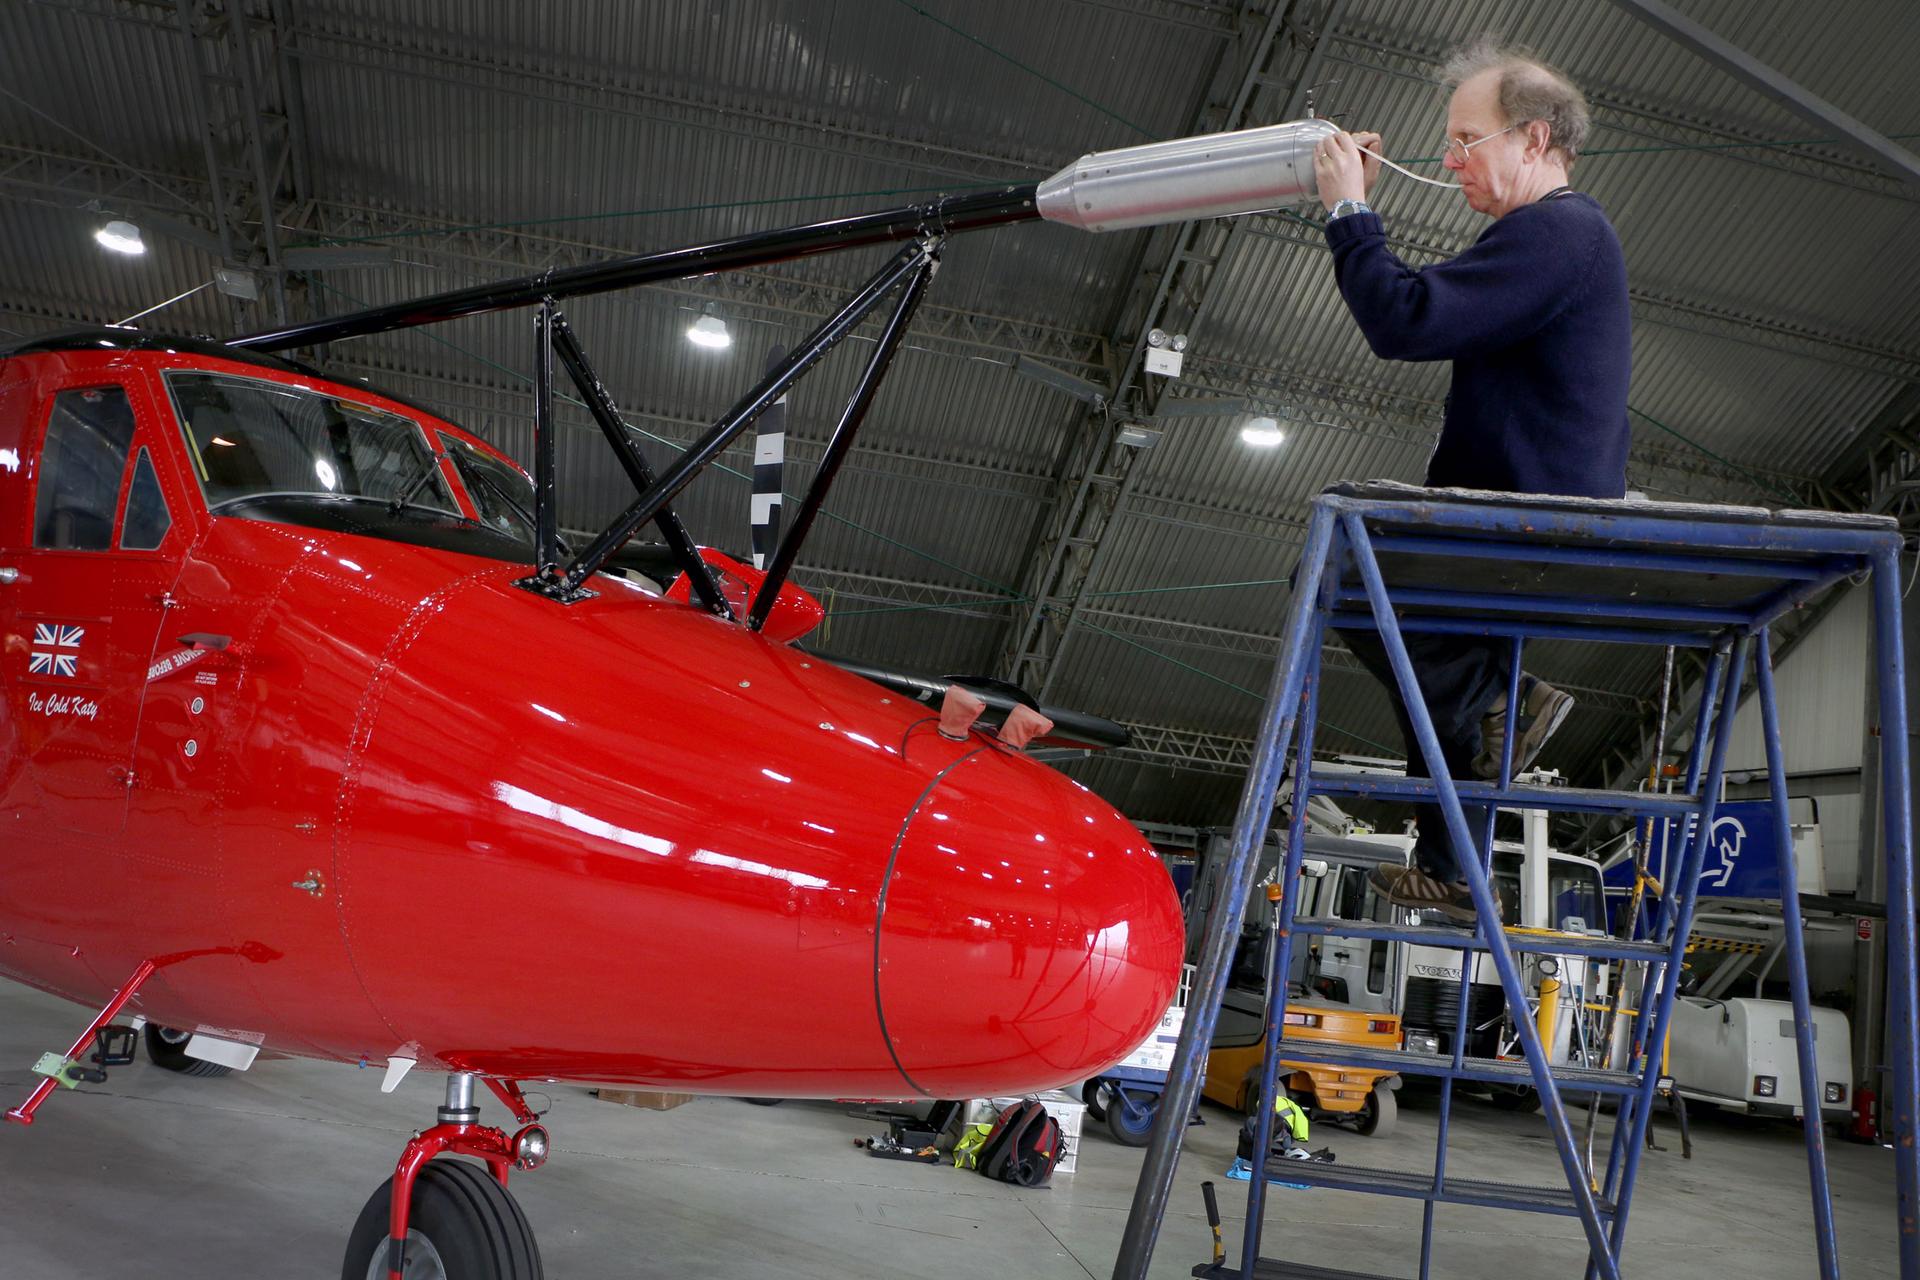 A man on a ladder works on a cherry red science airplane